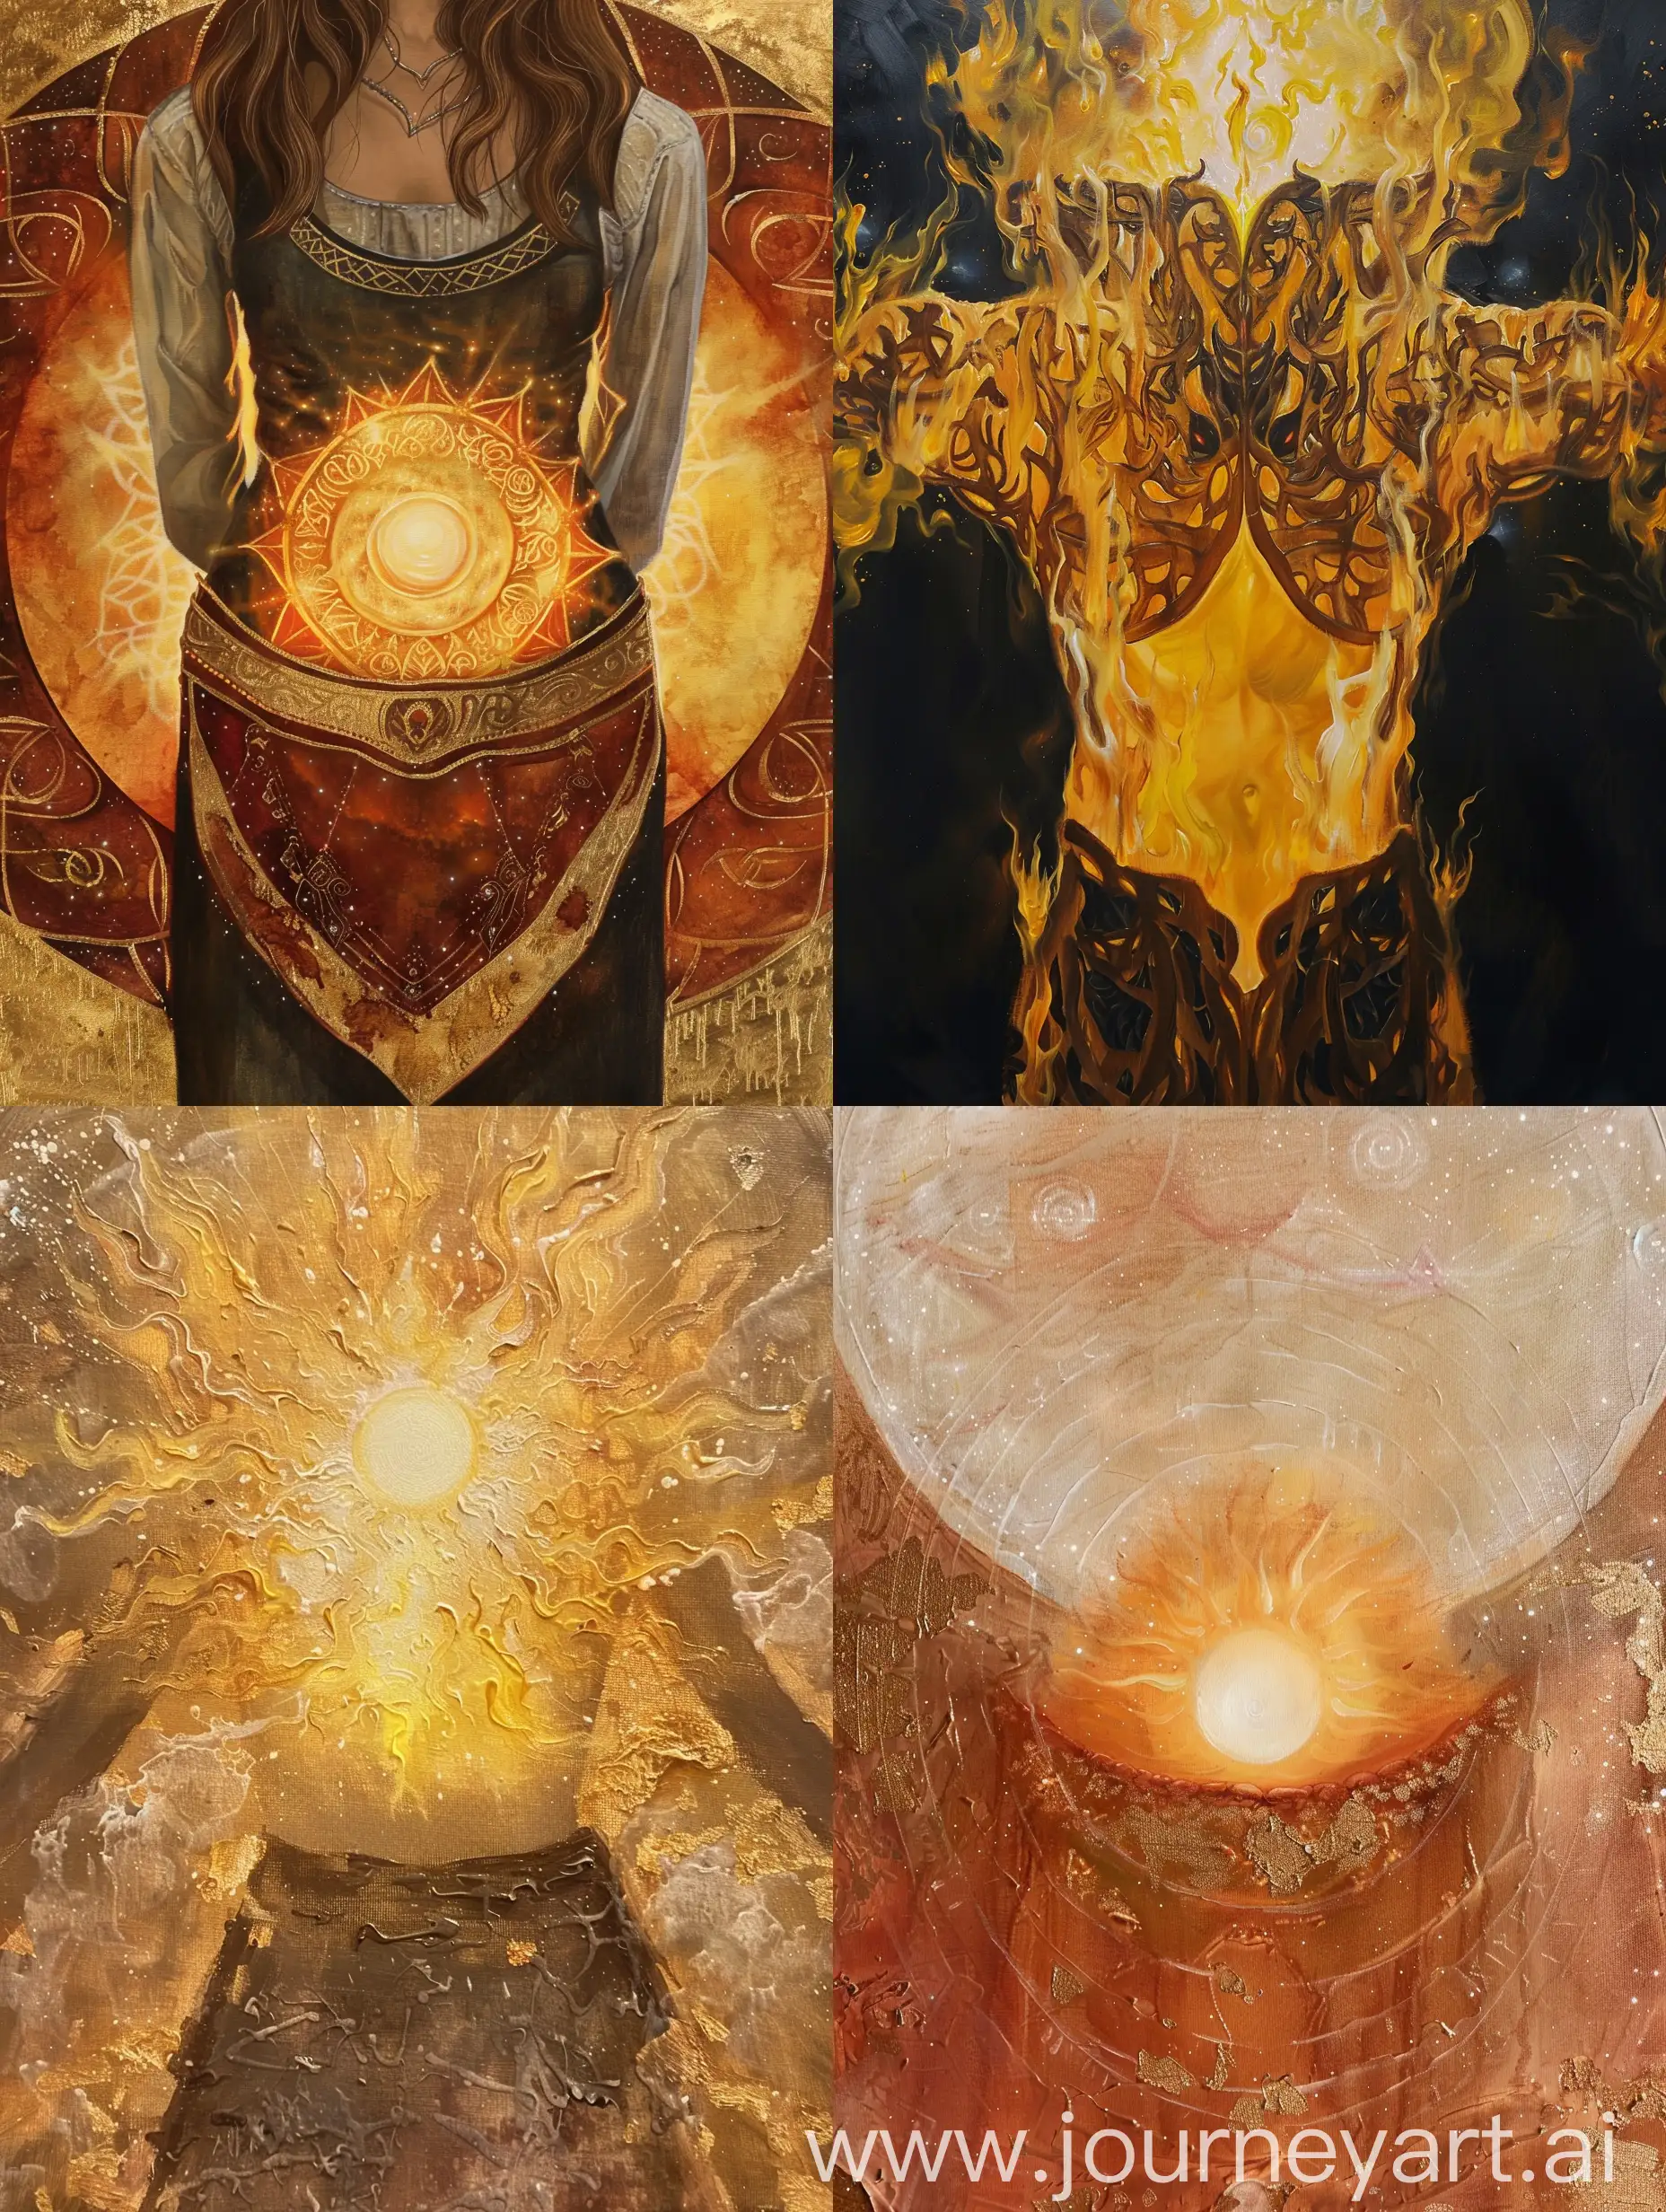 Details from my imagination for the systems of journey: altar art paints, #fantasyart #characterart #midjourney #aigeneratedart #alart #alartcommunity #alartists. 

Details, subject: #oil #painting on #canvas #art, #contrast #noai. Photorealism. Waist up view, the one of the first primordial, the lady of light, the sun, fire, the glow, the stars she brightens all. She takes a lesser form to manifest, but is still greater than most gods. 

Finishing details: #polish #master #artist #surreal #special, #artificialintelligence #aiart #aiartwork #aiartist #aiartcommunity #midjourney #midjourneyart. 